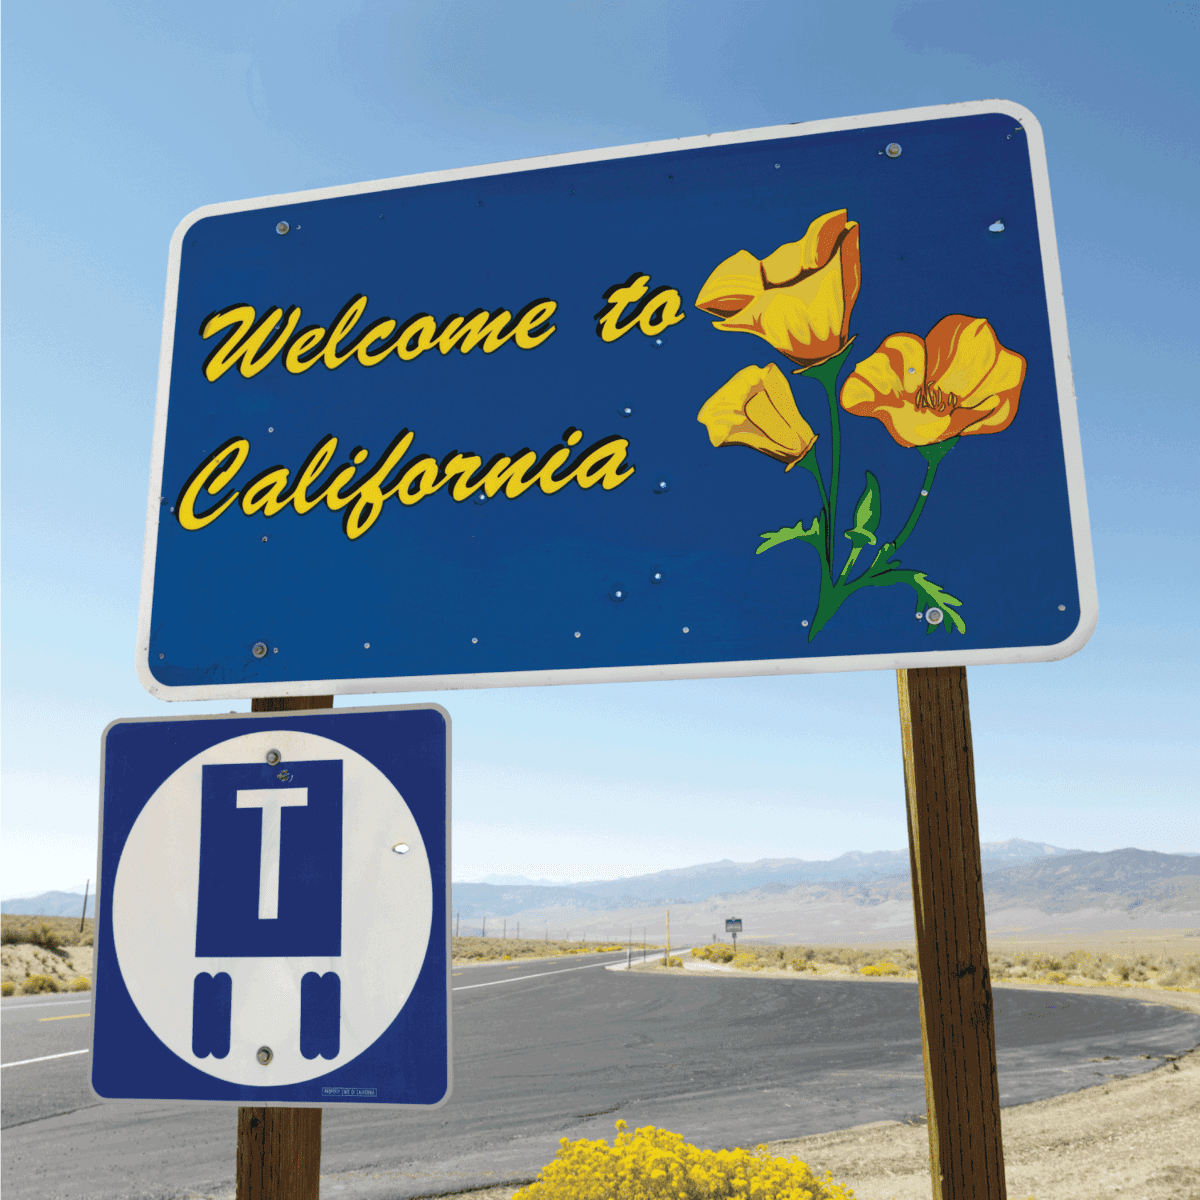 Welcome to California sign with strip of highway and clear blue sky in background.